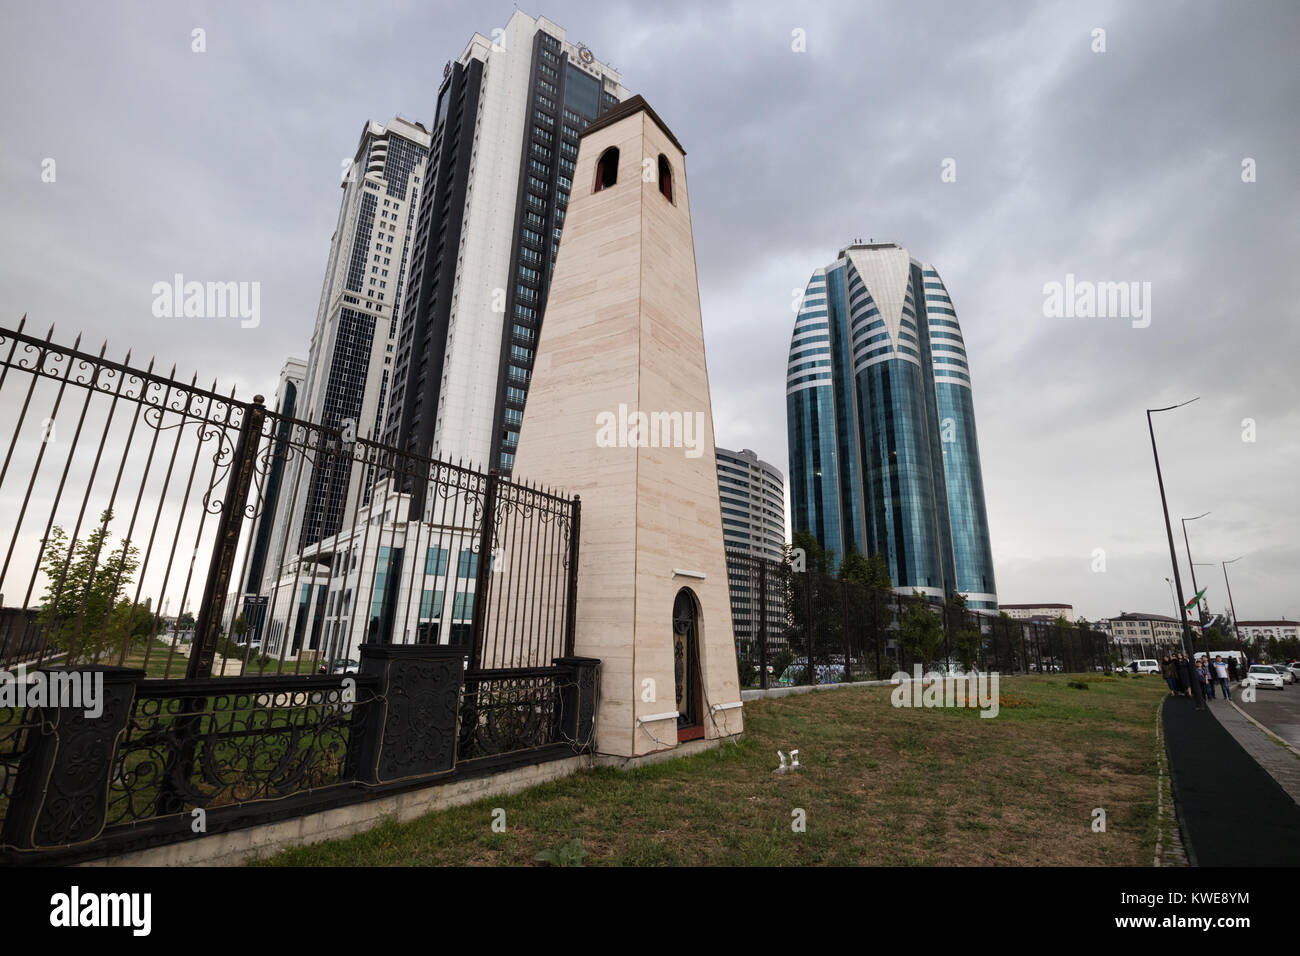 Grozny-City towers (after Nakh or Vainakh medieval towers), these two towers are built after Nakh (or Vainakh) medieval towers Stock Photo